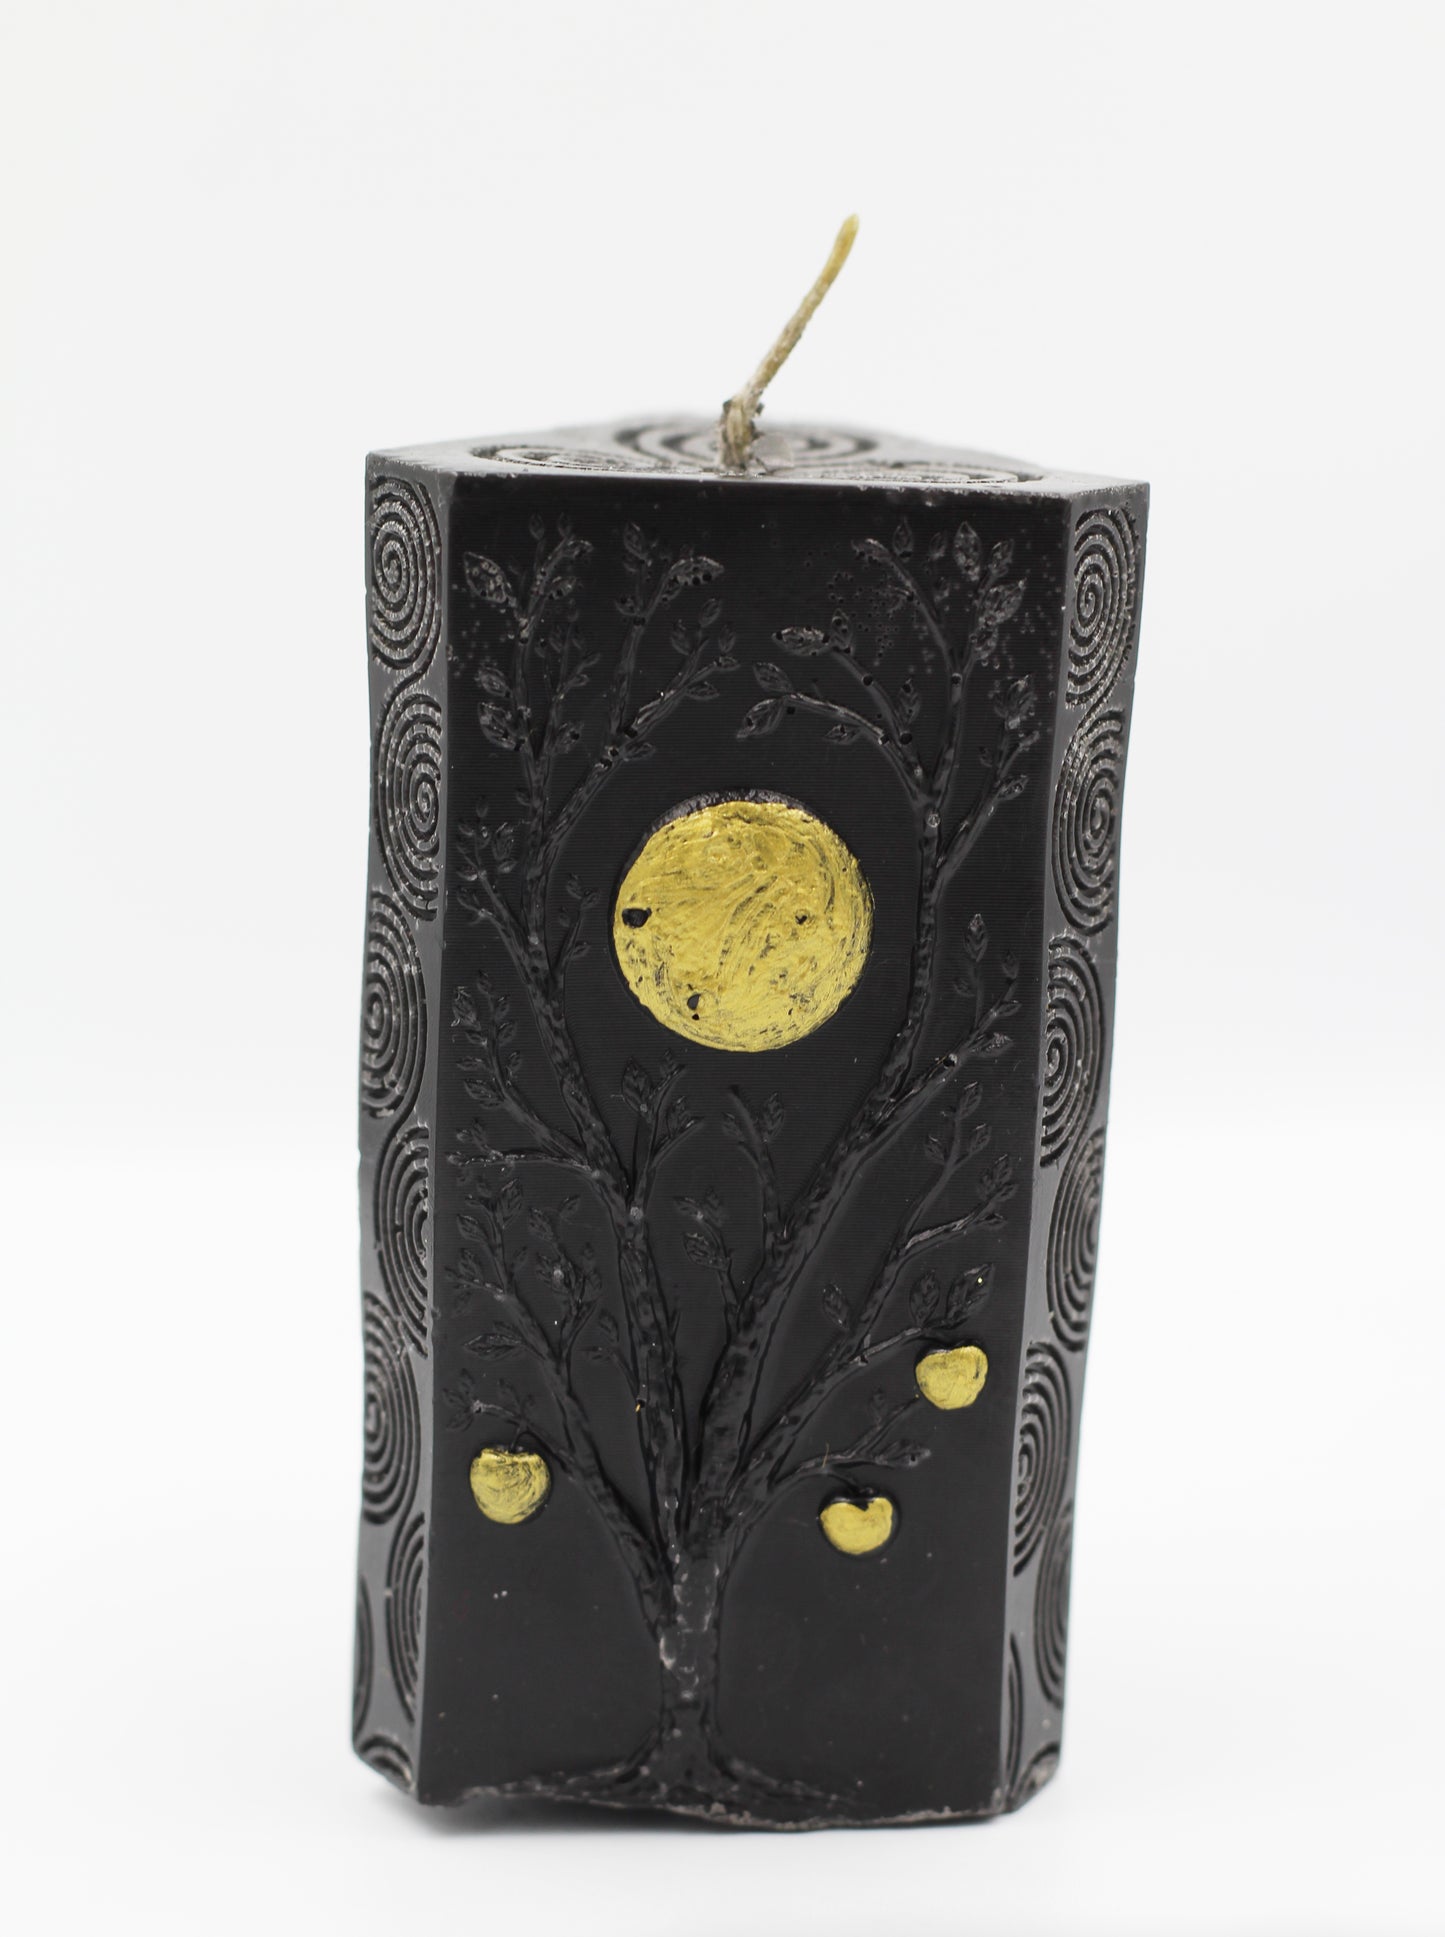 Hekas Creative - Triskelion Moon Phases 100% Beeswax Hand Painted Candle